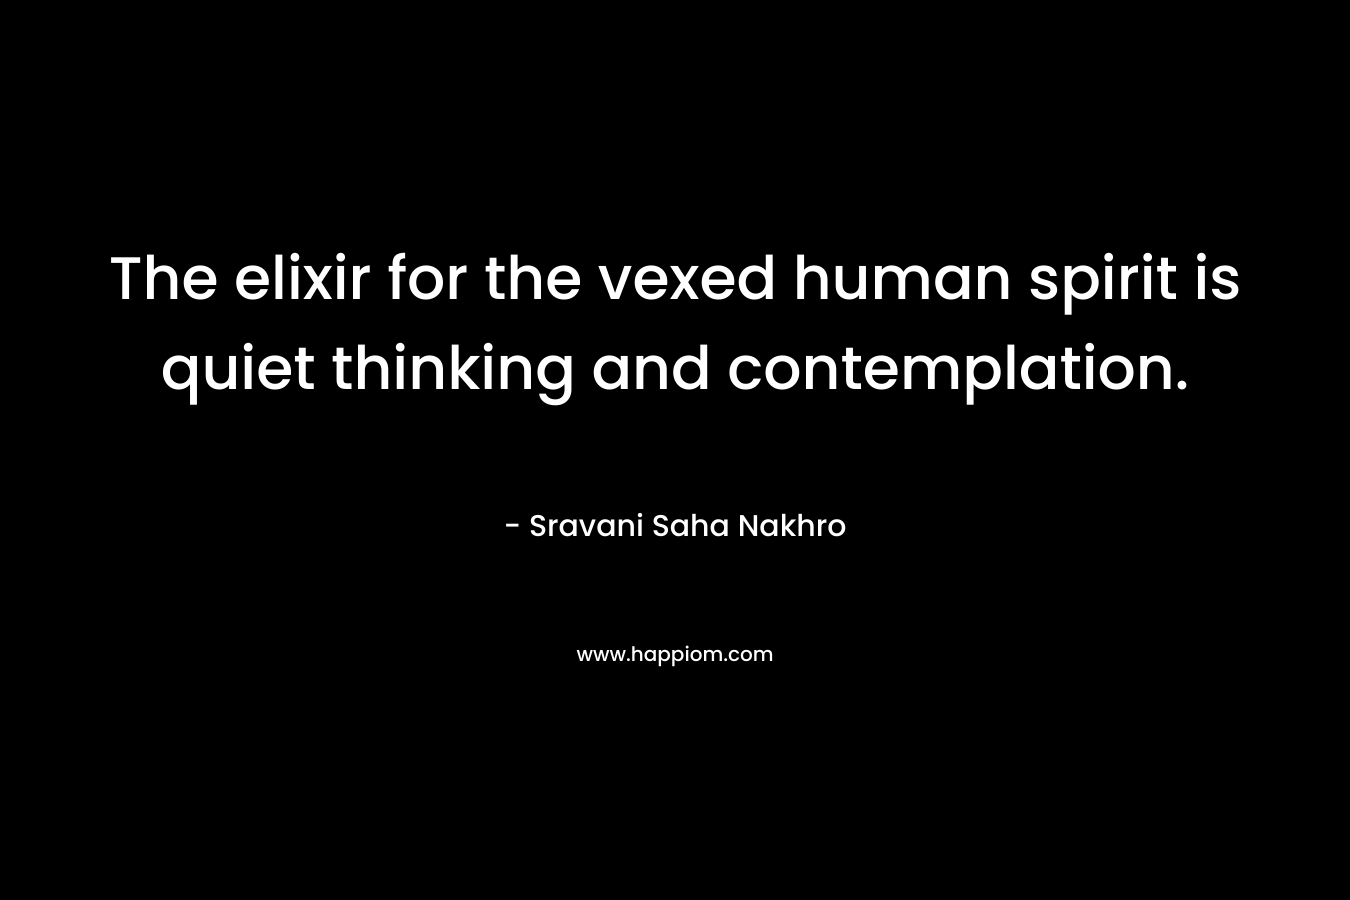 The elixir for the vexed human spirit is quiet thinking and contemplation.